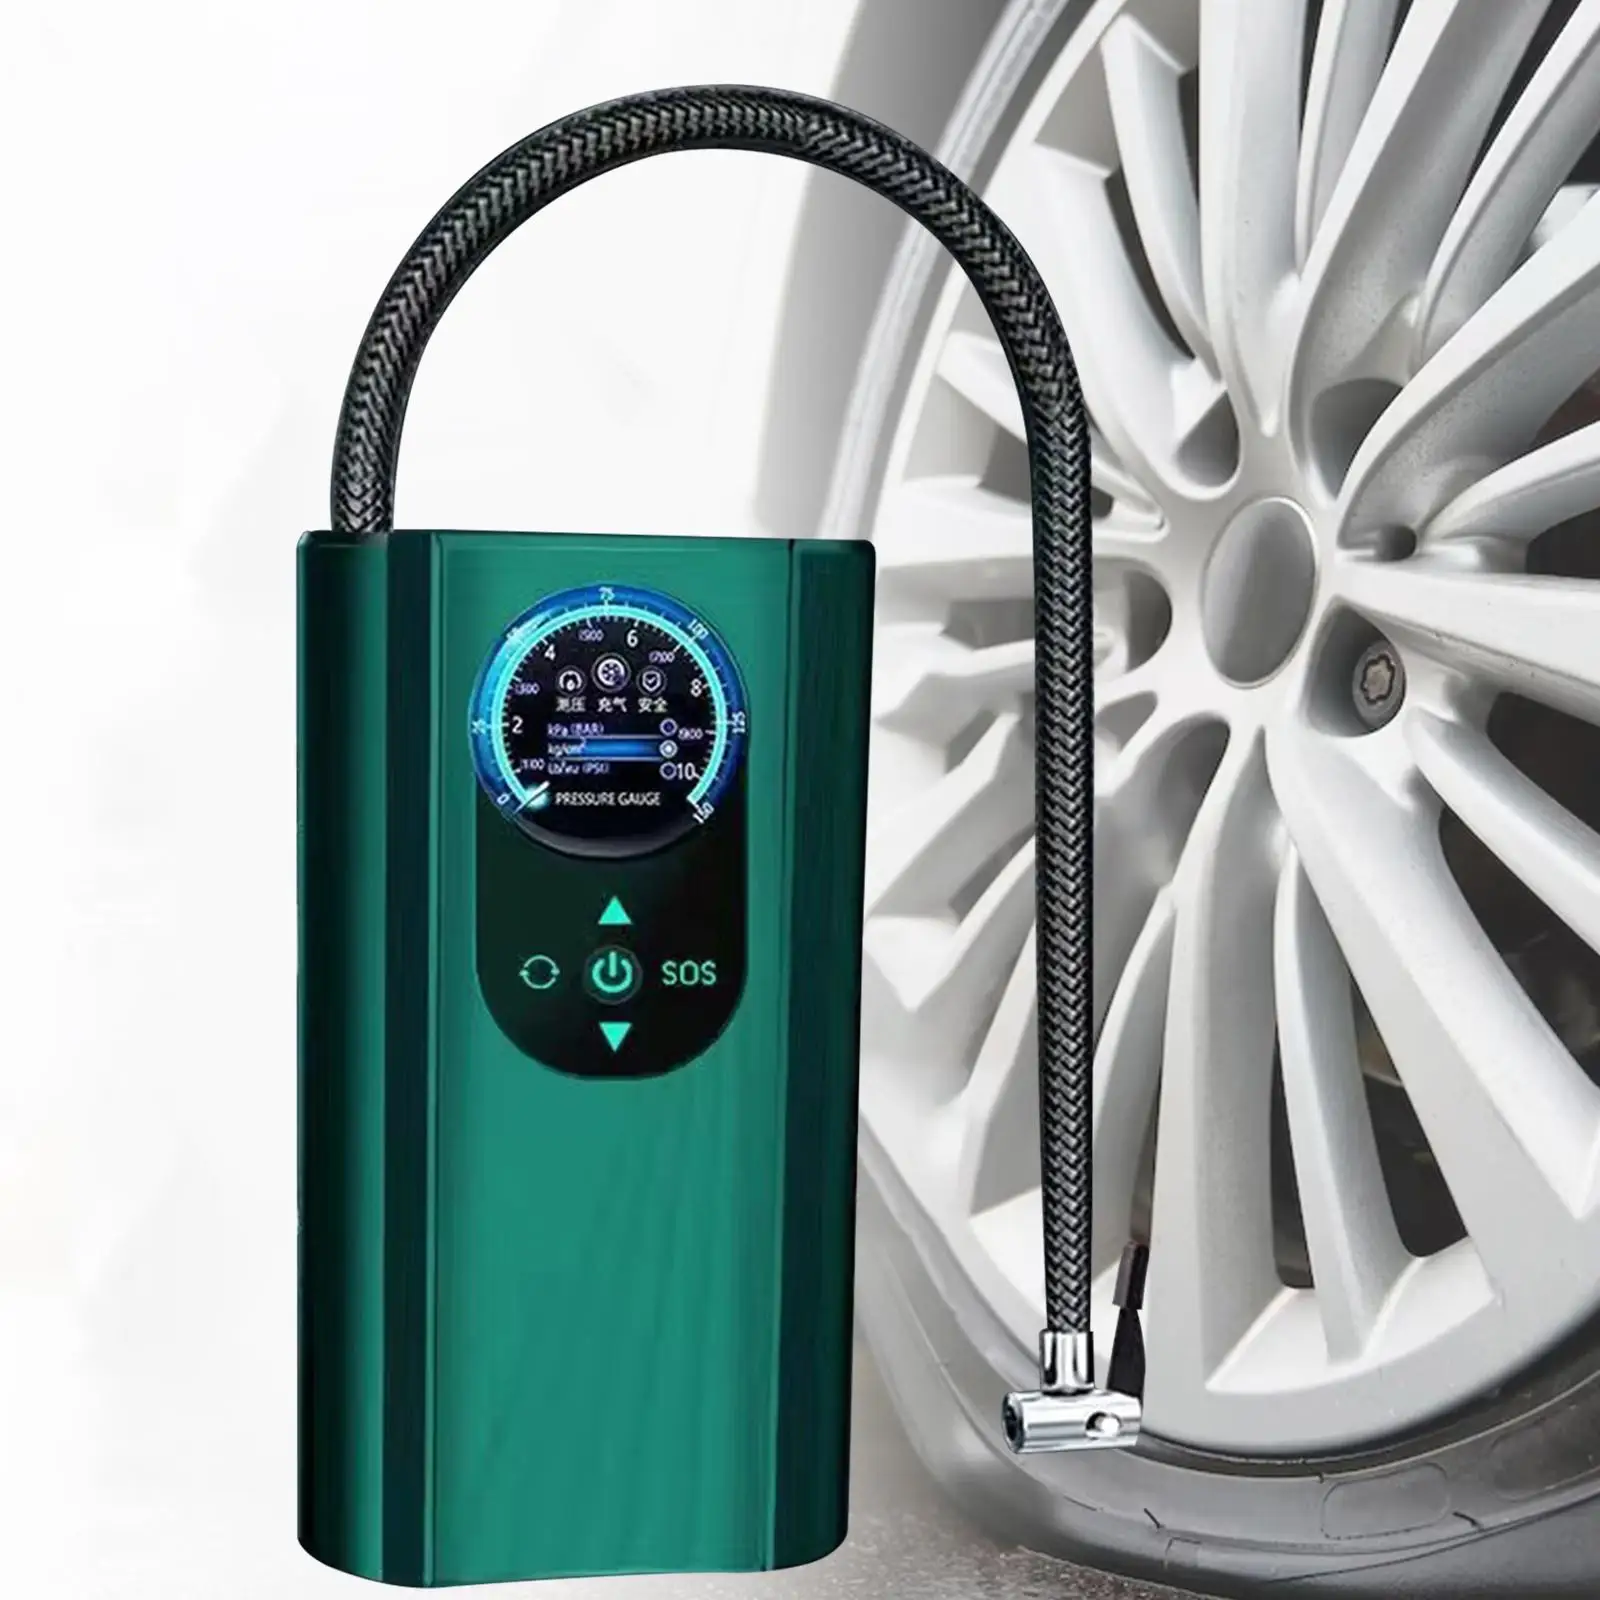 Portable Air Compressor LCD Display Screen with Pressure Gauge Tire Inflator Air